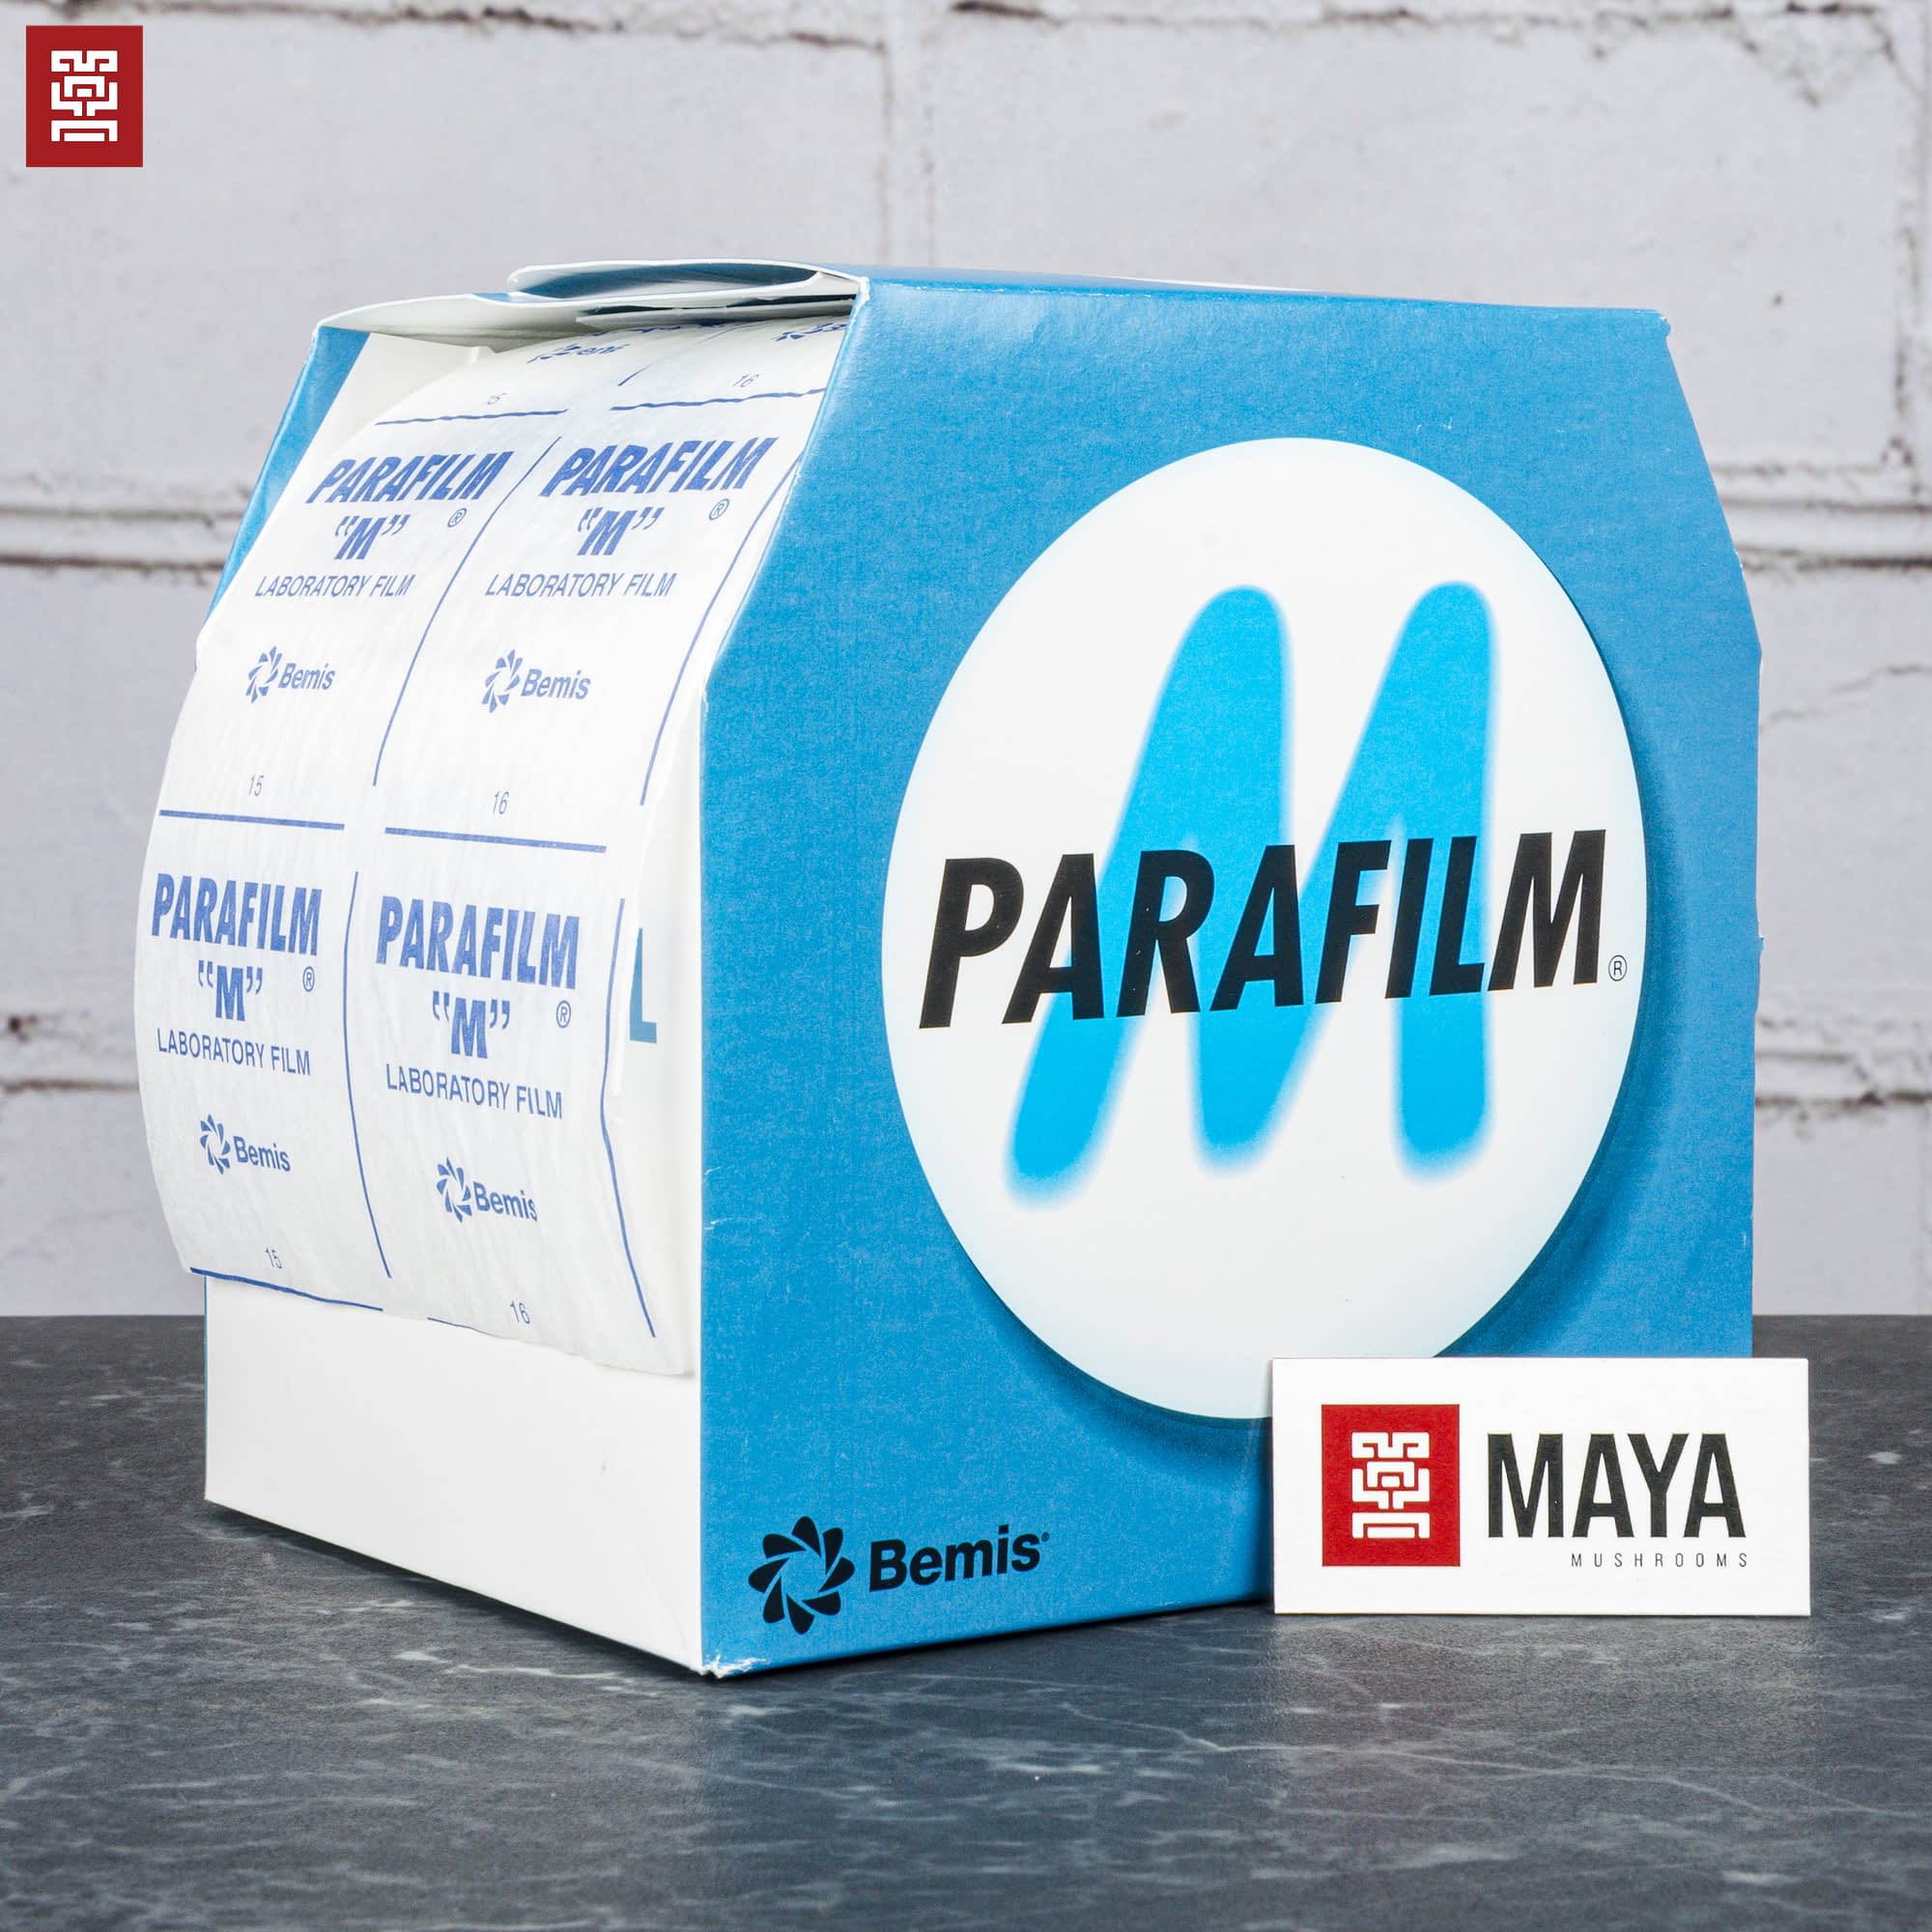 Parafilm 4-Inch Double Size Roll Dispensed